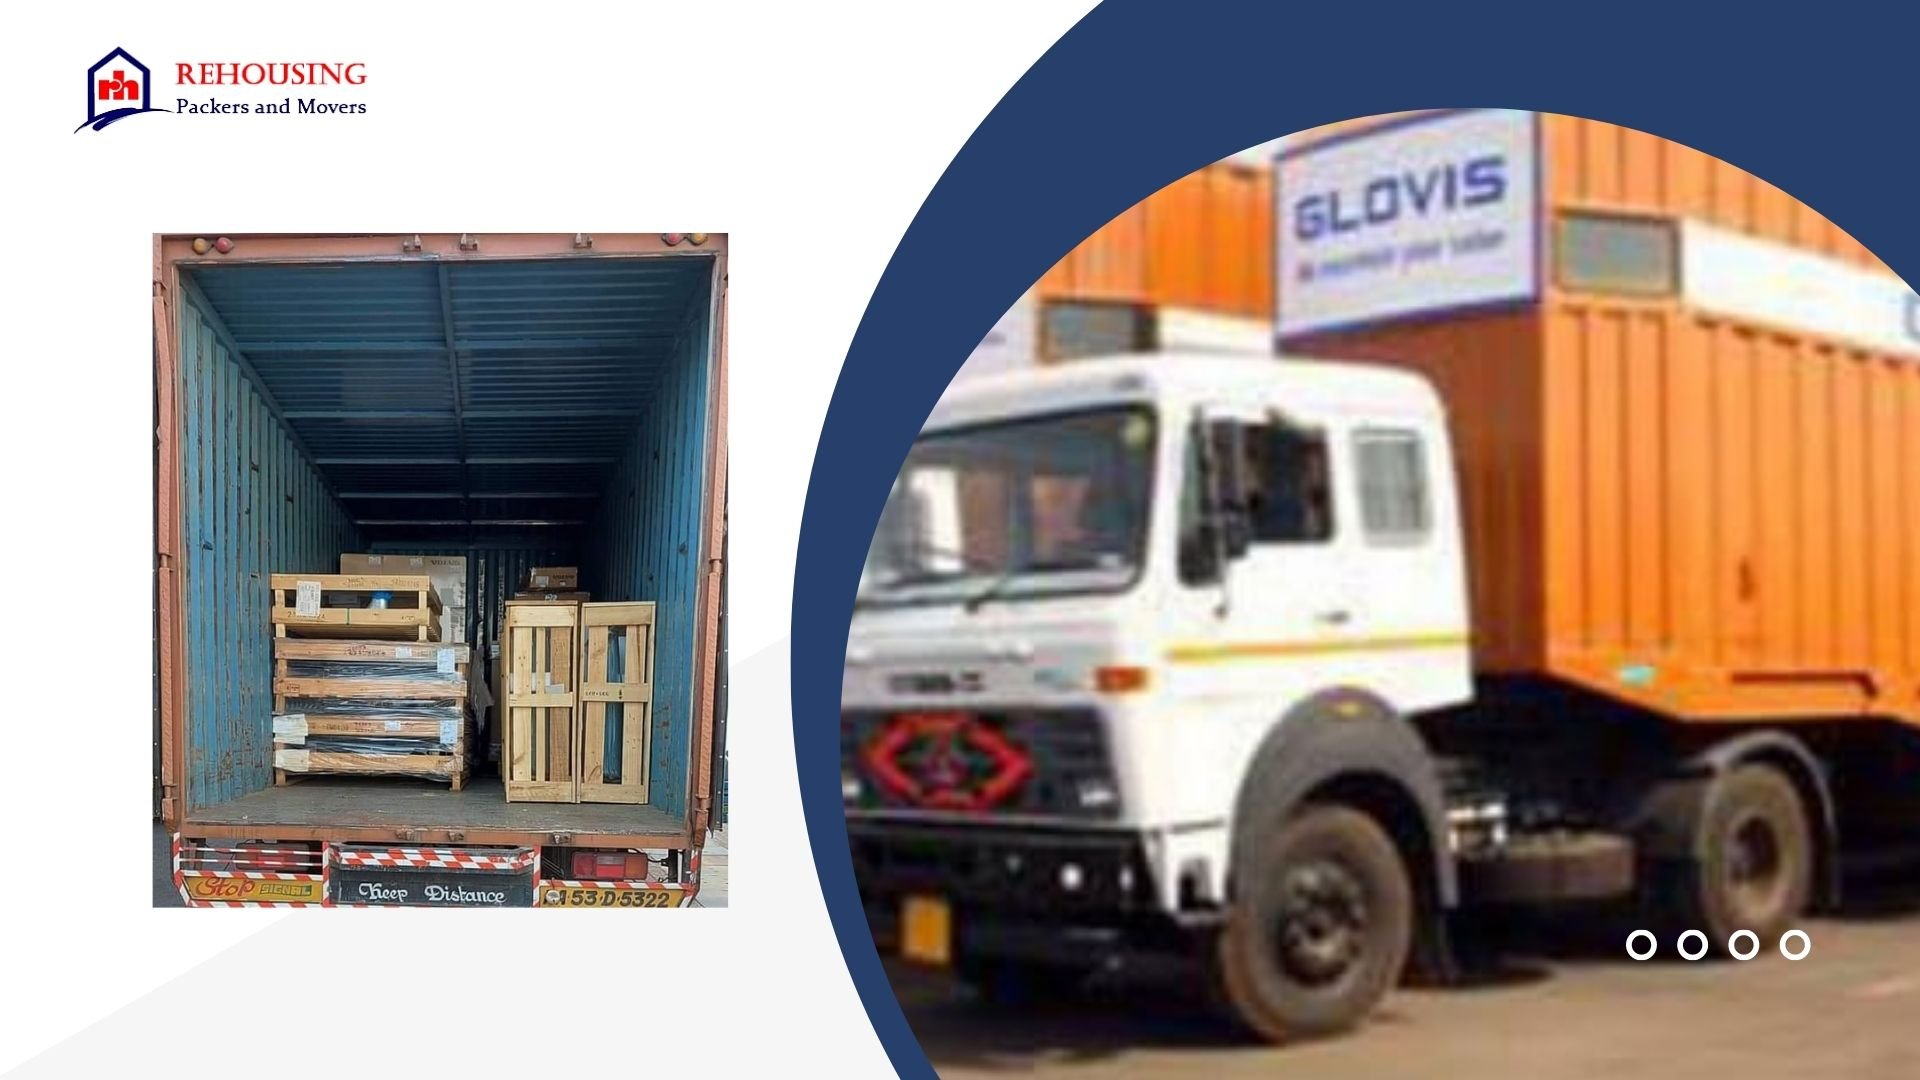 Packers and Movers From Dehradun to Hyderabad | Rehousing packers and movers